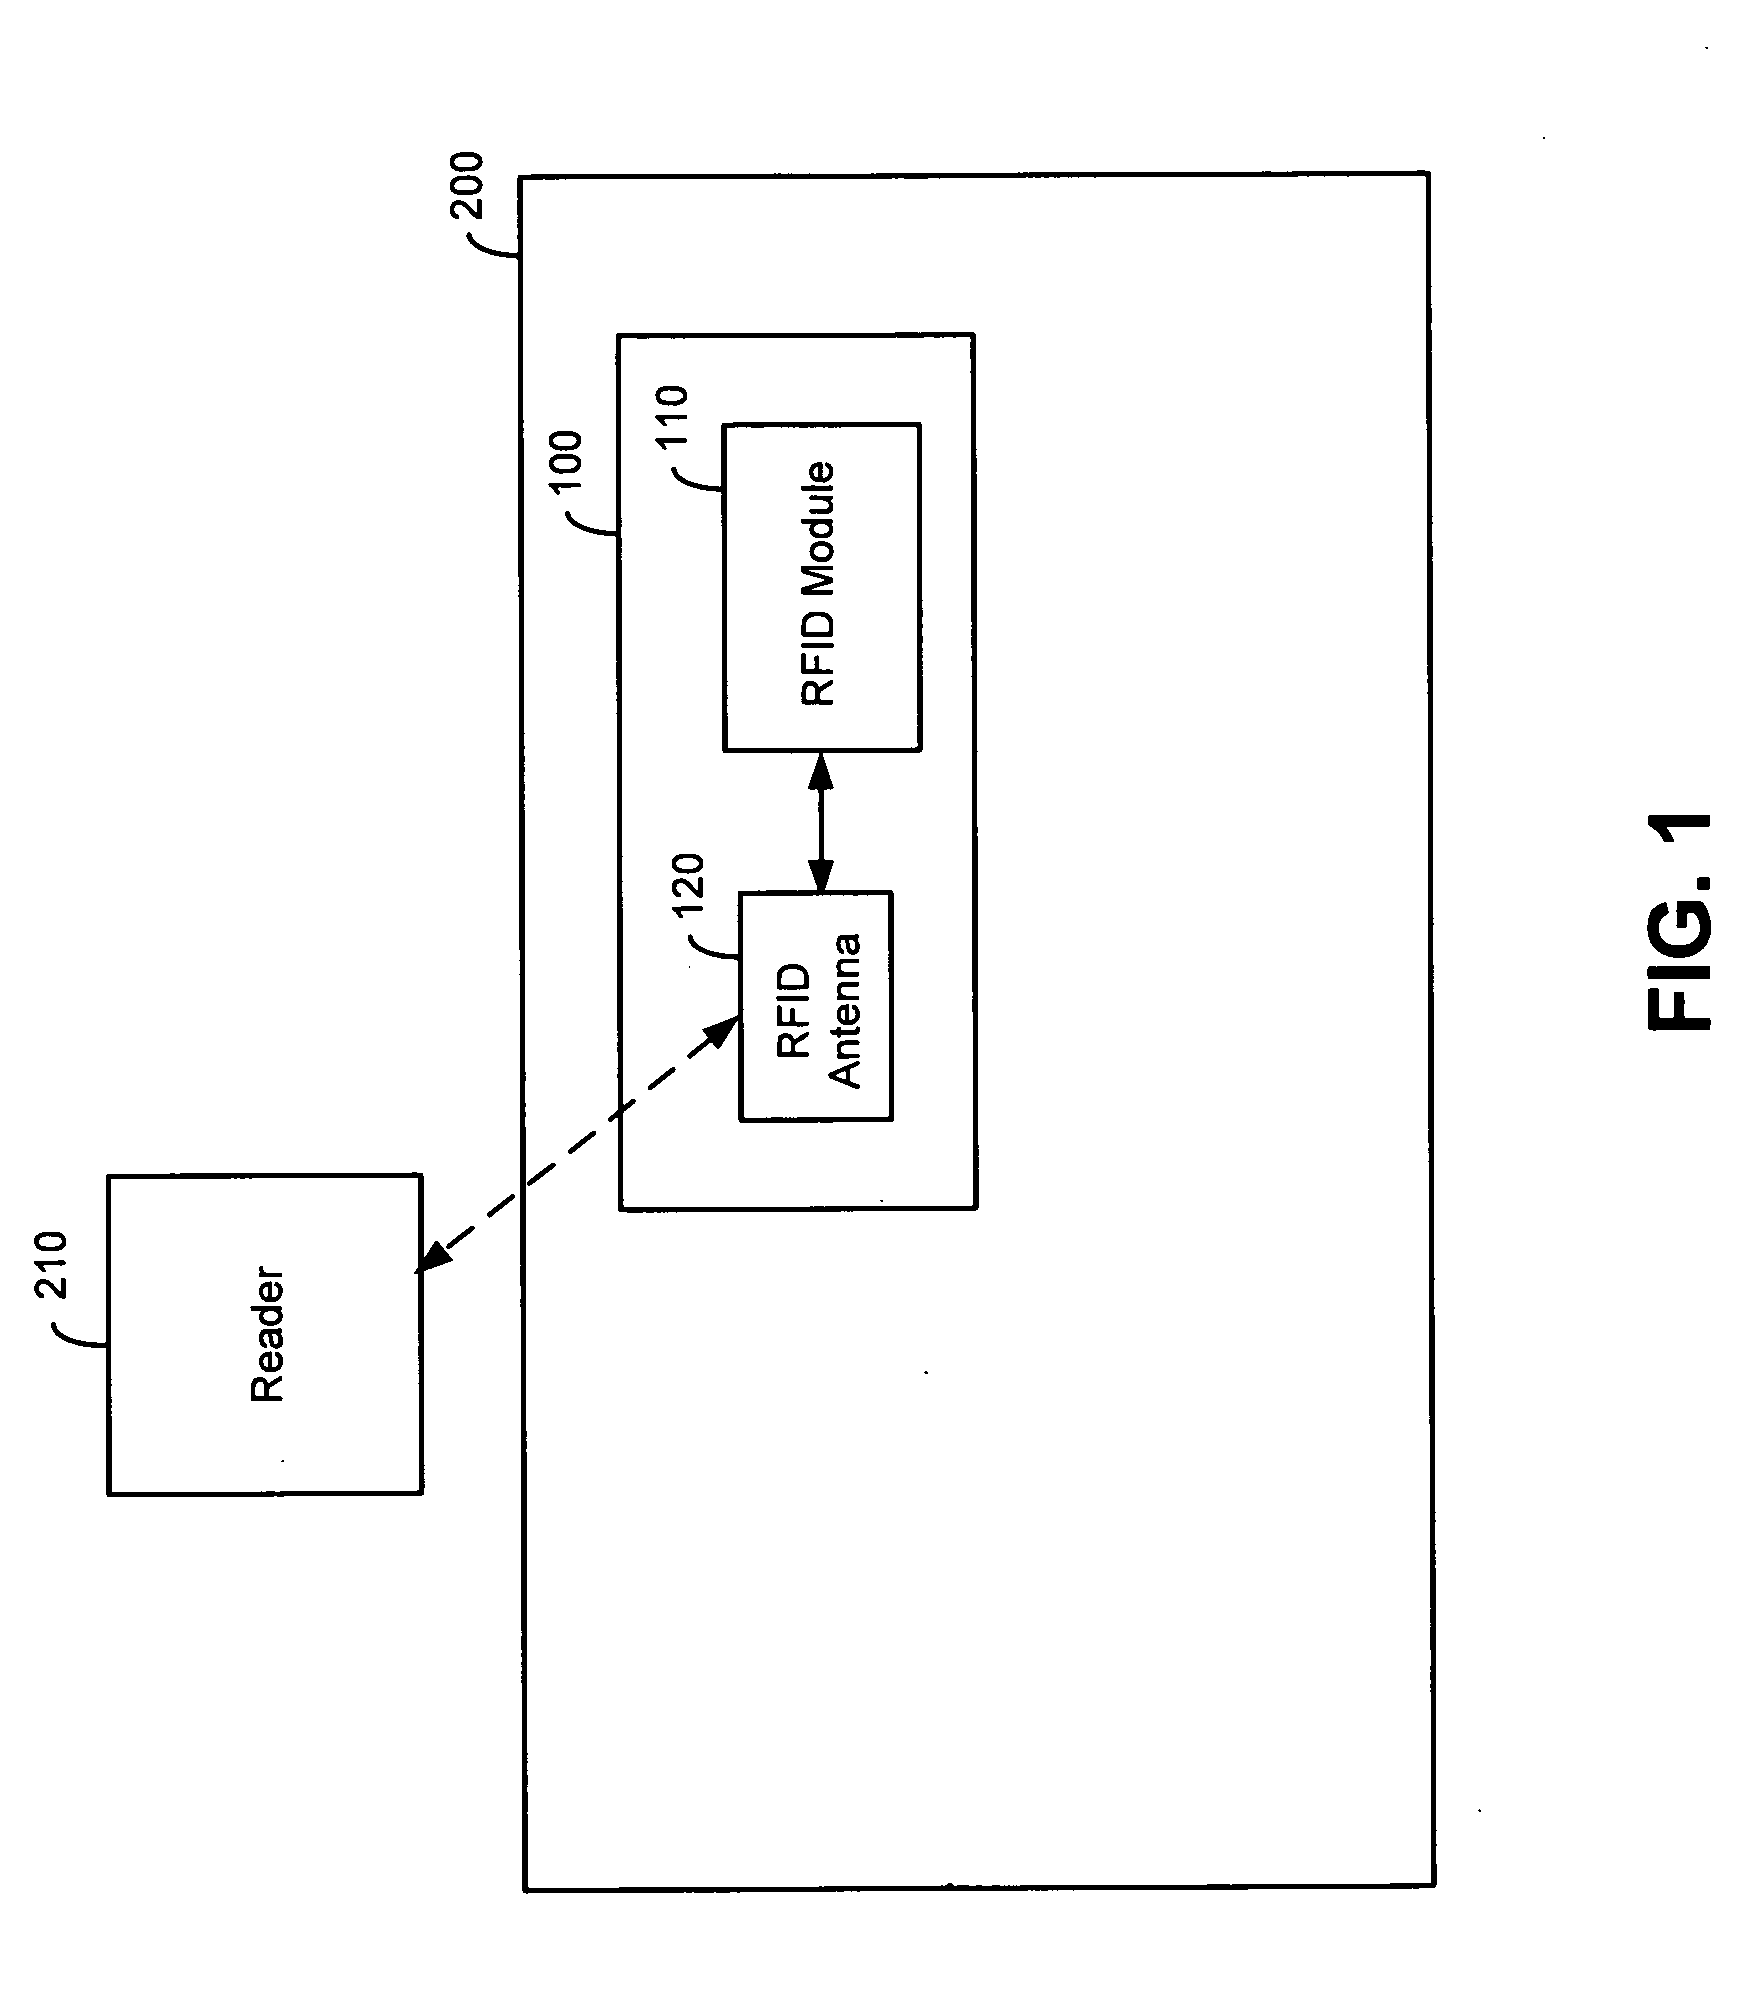 Radio Frequency Identification Integrated Circuit Having An Antenna Incorporated Within The Package Thereof